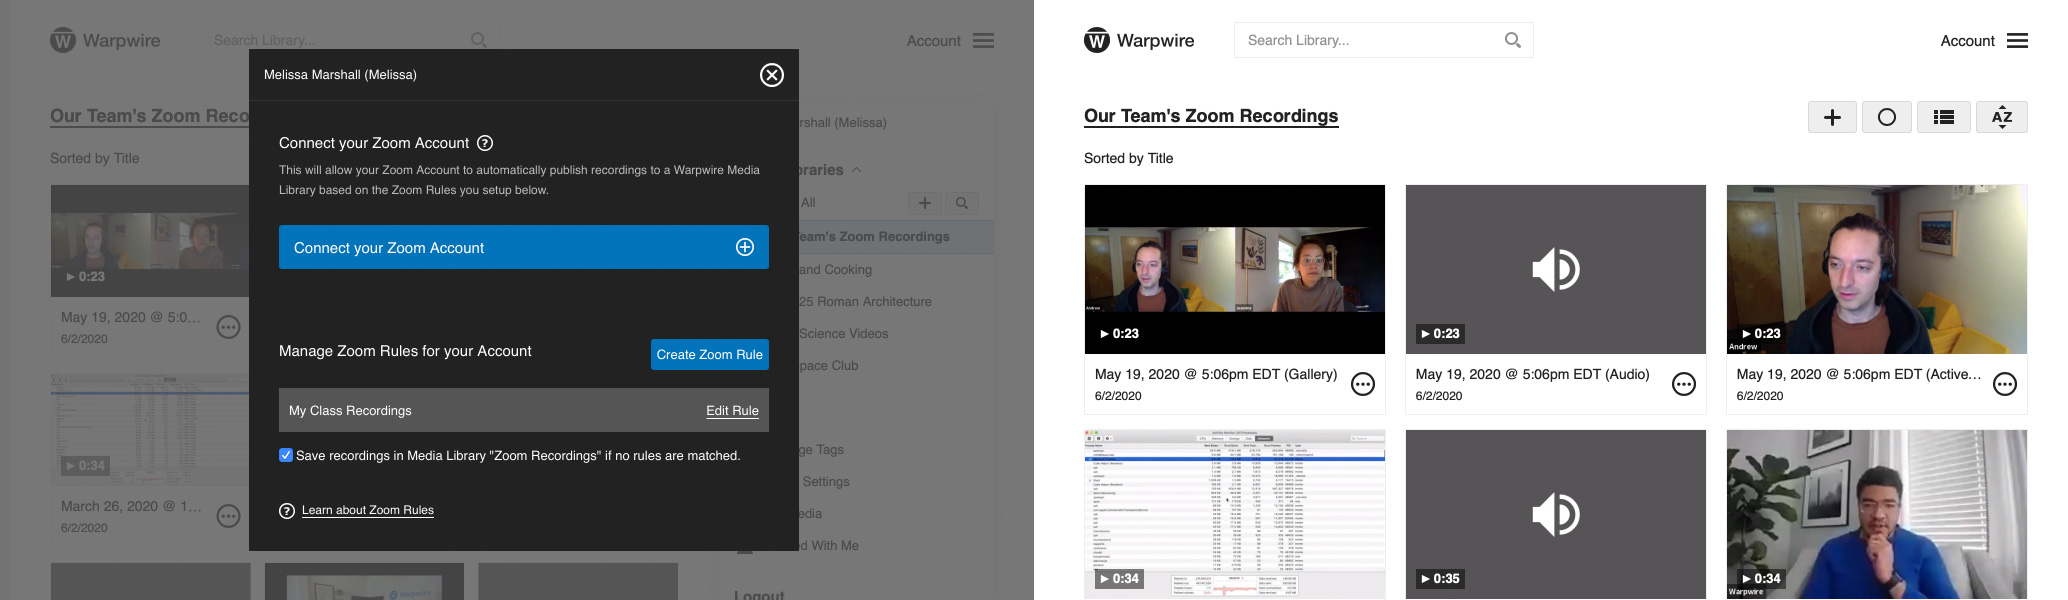 Connect your Zoom account directly to Warpwire and automatically save your Zoom recordings to Warpwire.